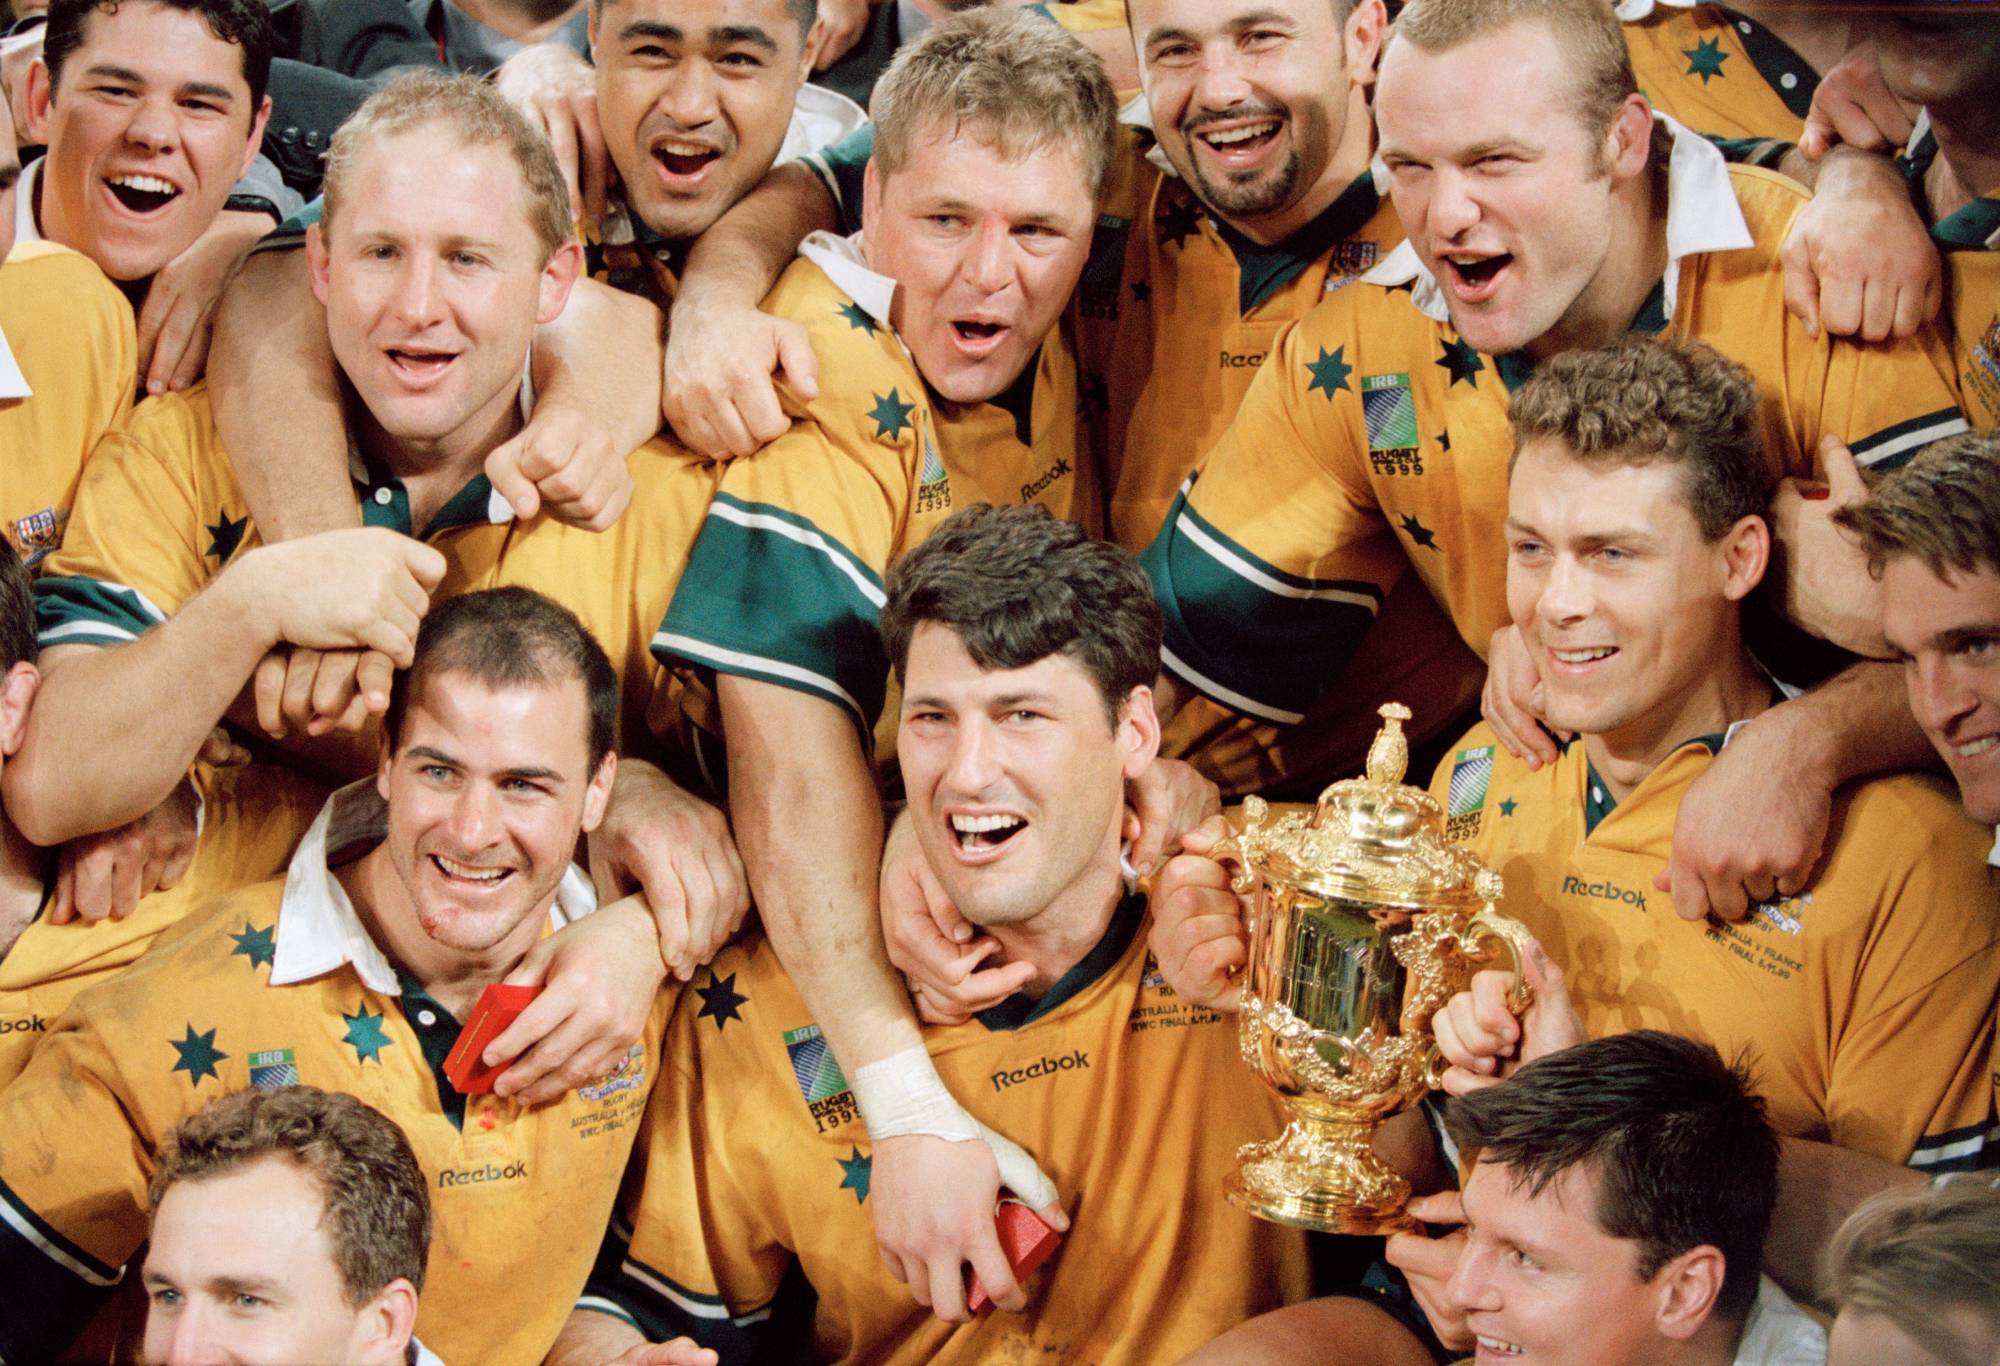 GOLD DIGGER: The search for Australian rugby